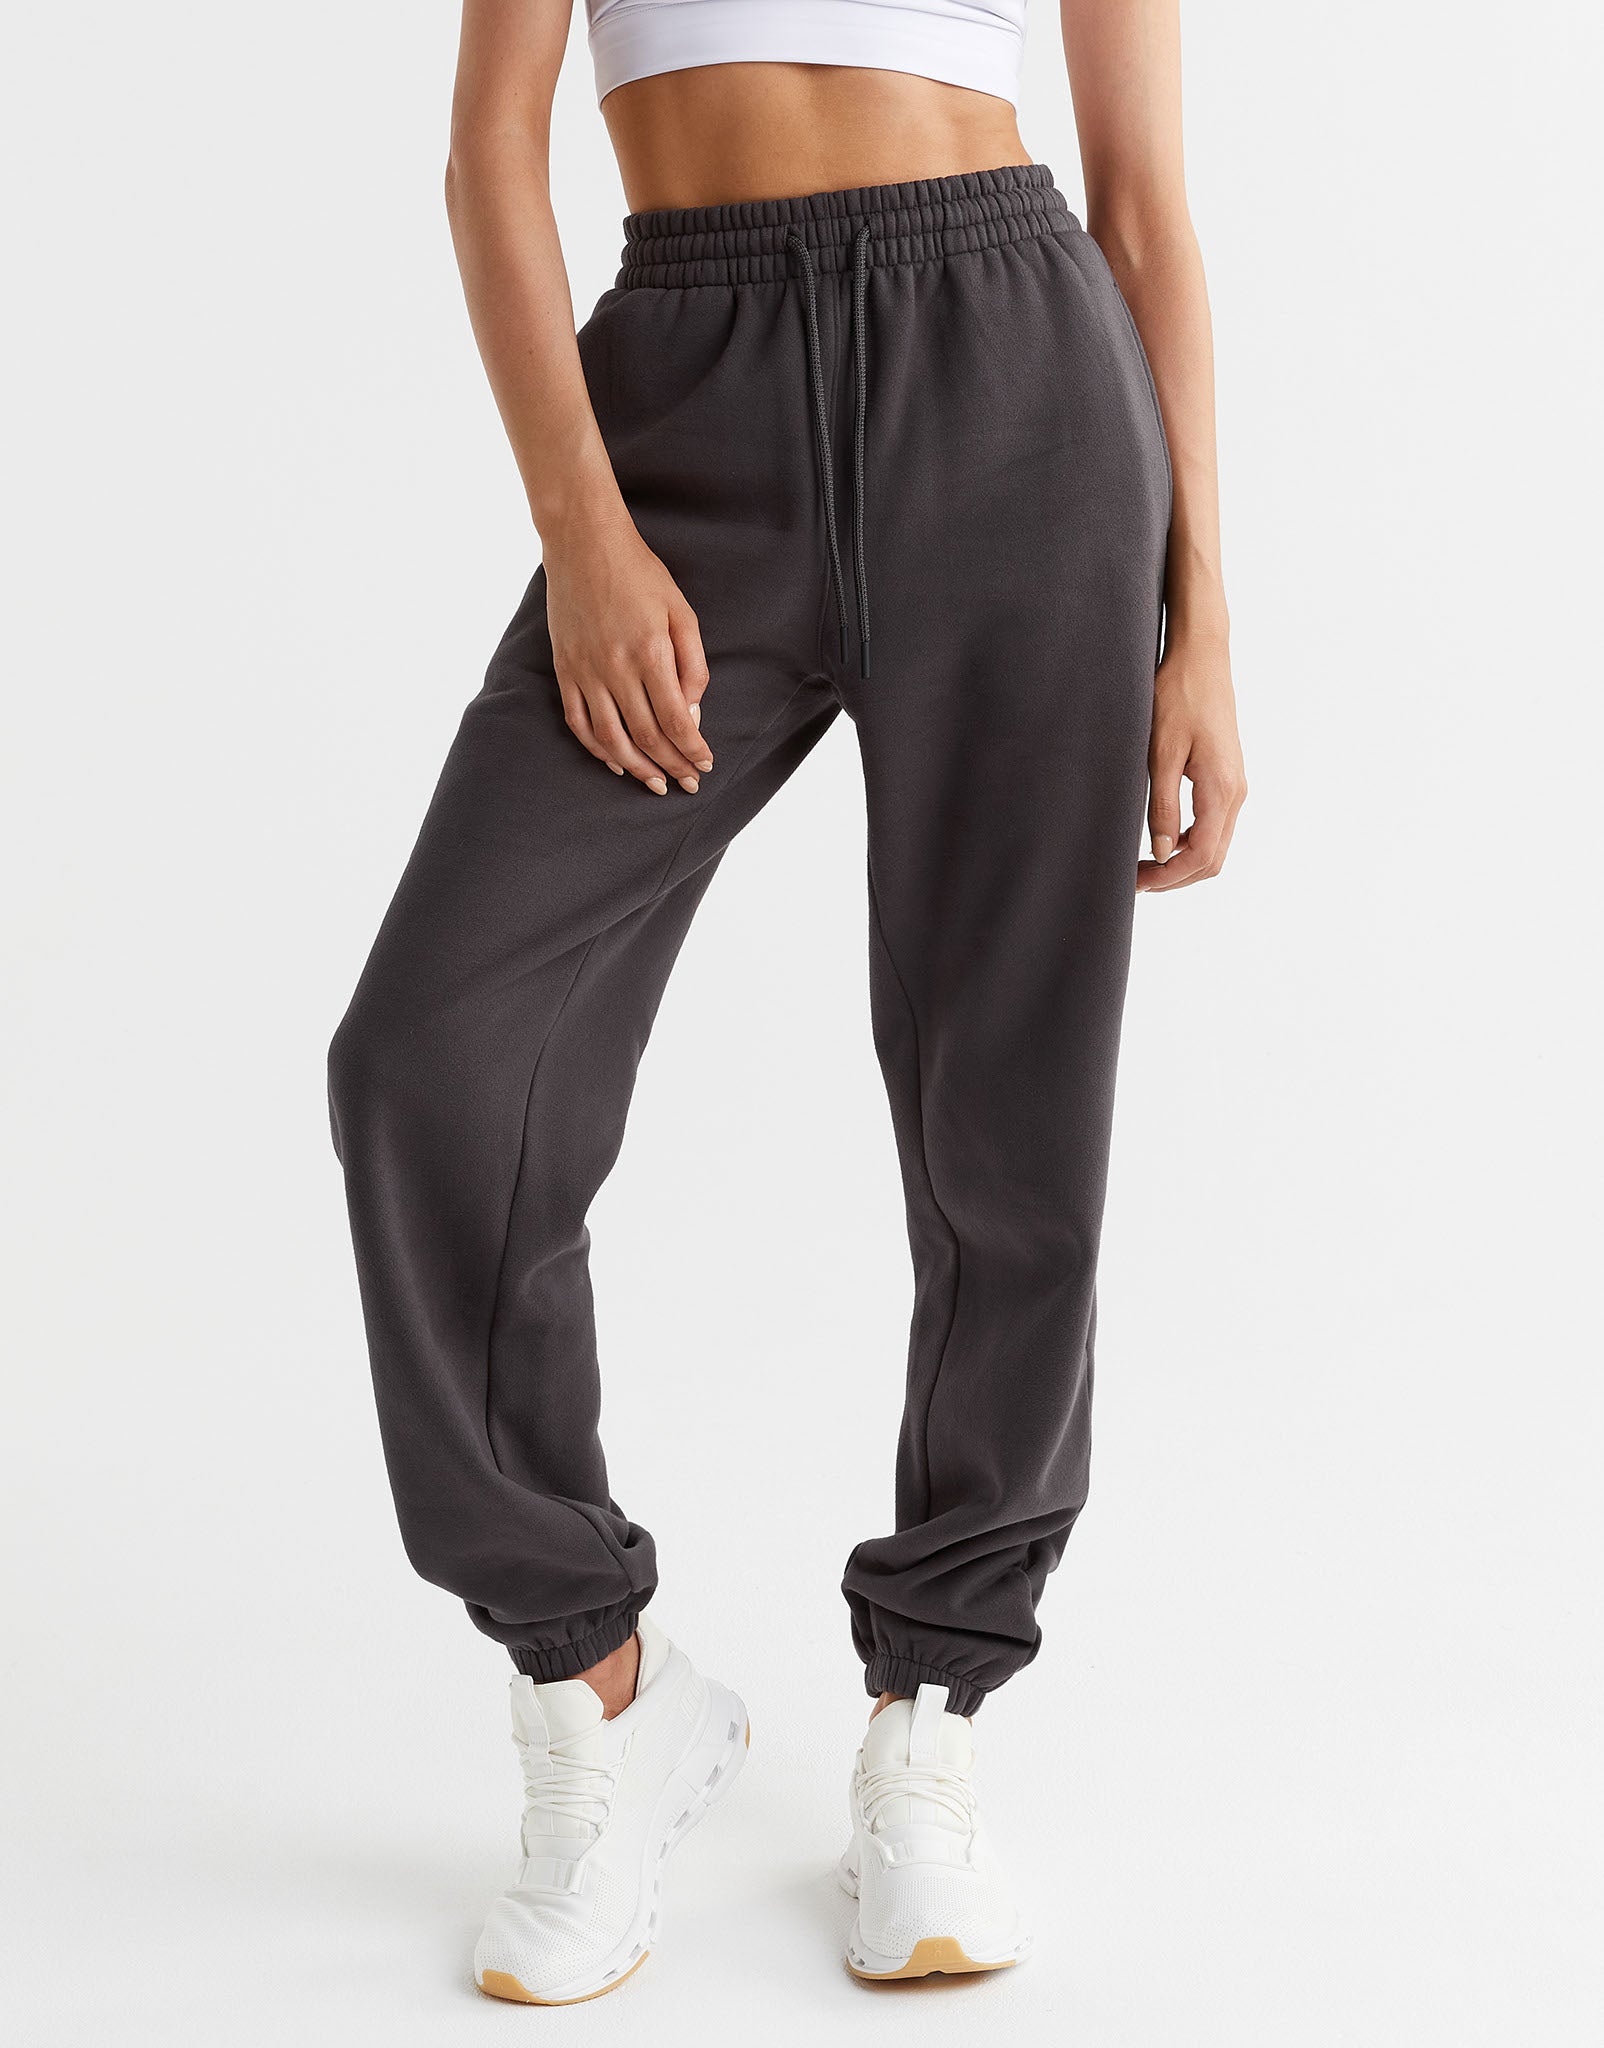 Lilybod-Lucy-Oversized-Fleece-Track-Pant-Coal-Gray-LL89-CLG-2-New.jpeg